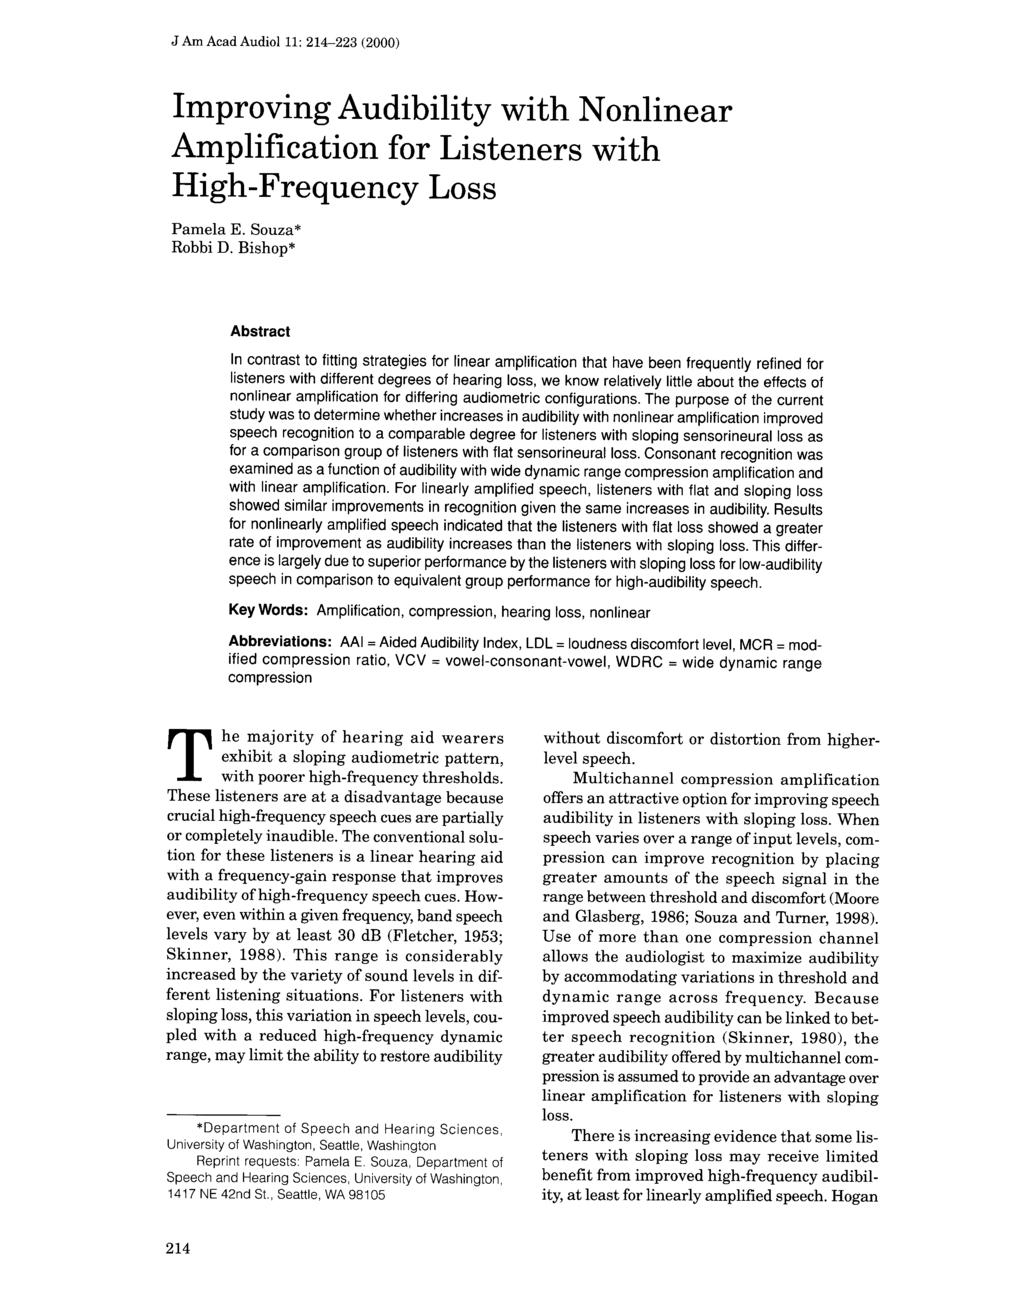 J Am Acad Audiol 11 : 214-223 (2000) Improving Audibility with Nonlinear Amplification for Listeners with High-Frequency Loss Pamela E. Souza* Robbi D.